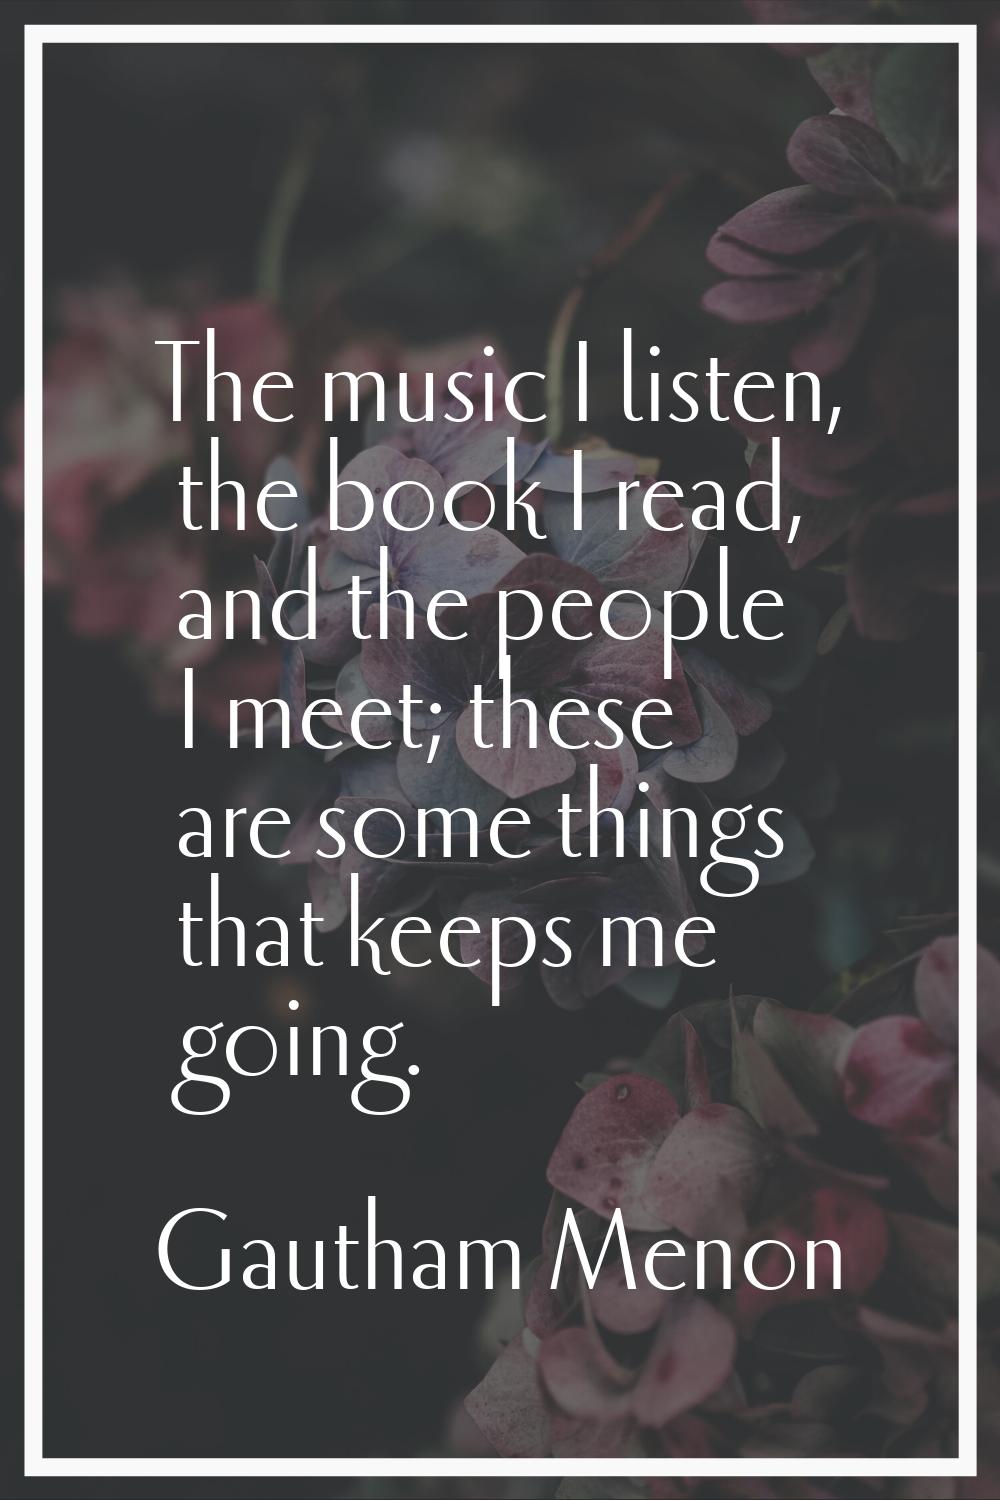 The music I listen, the book I read, and the people I meet; these are some things that keeps me goi